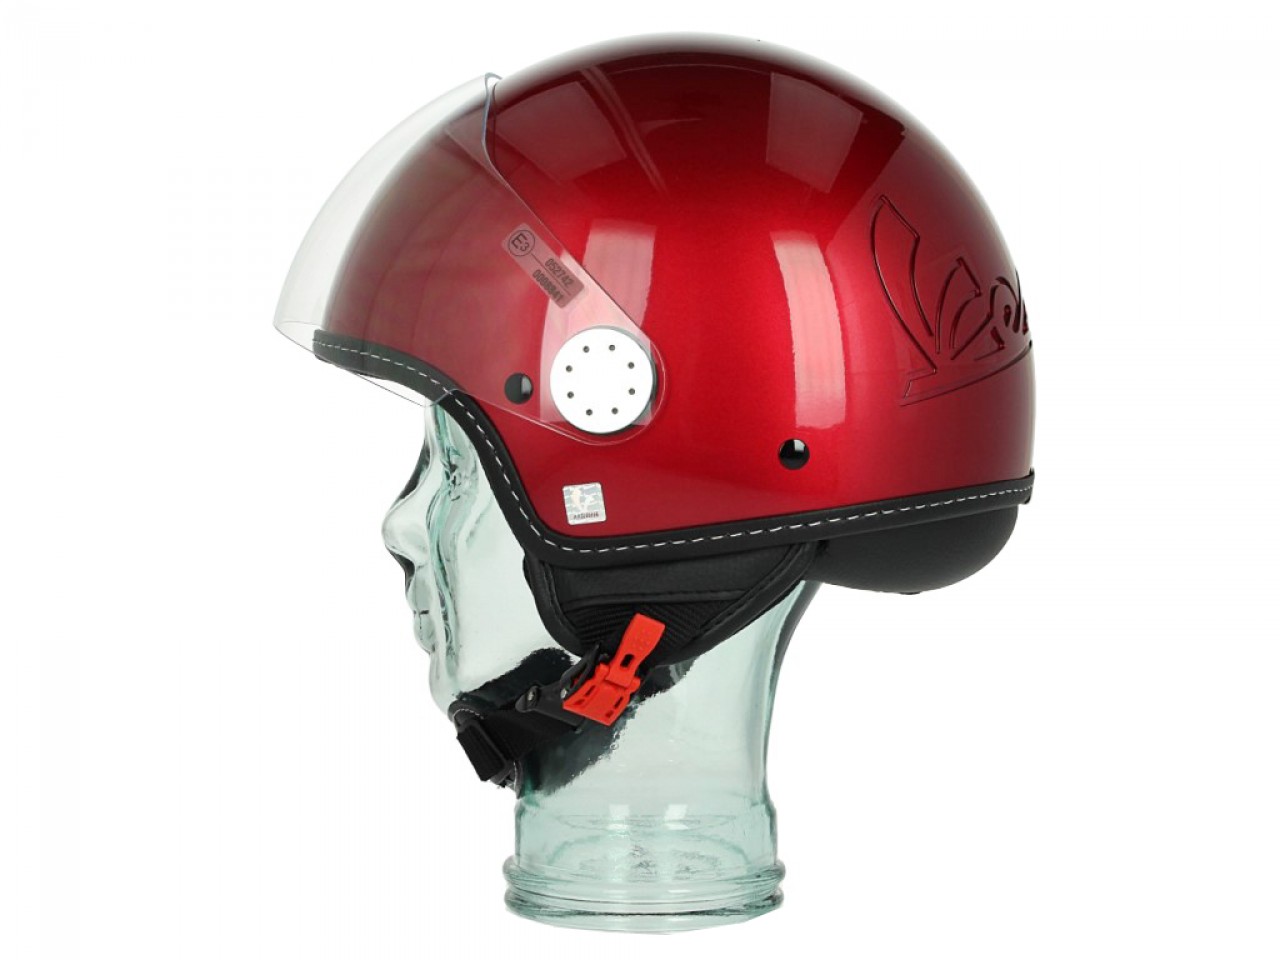 Piaggio helmet VESPA high pressure buffer liner removable and washable  riding half helmet average size imported